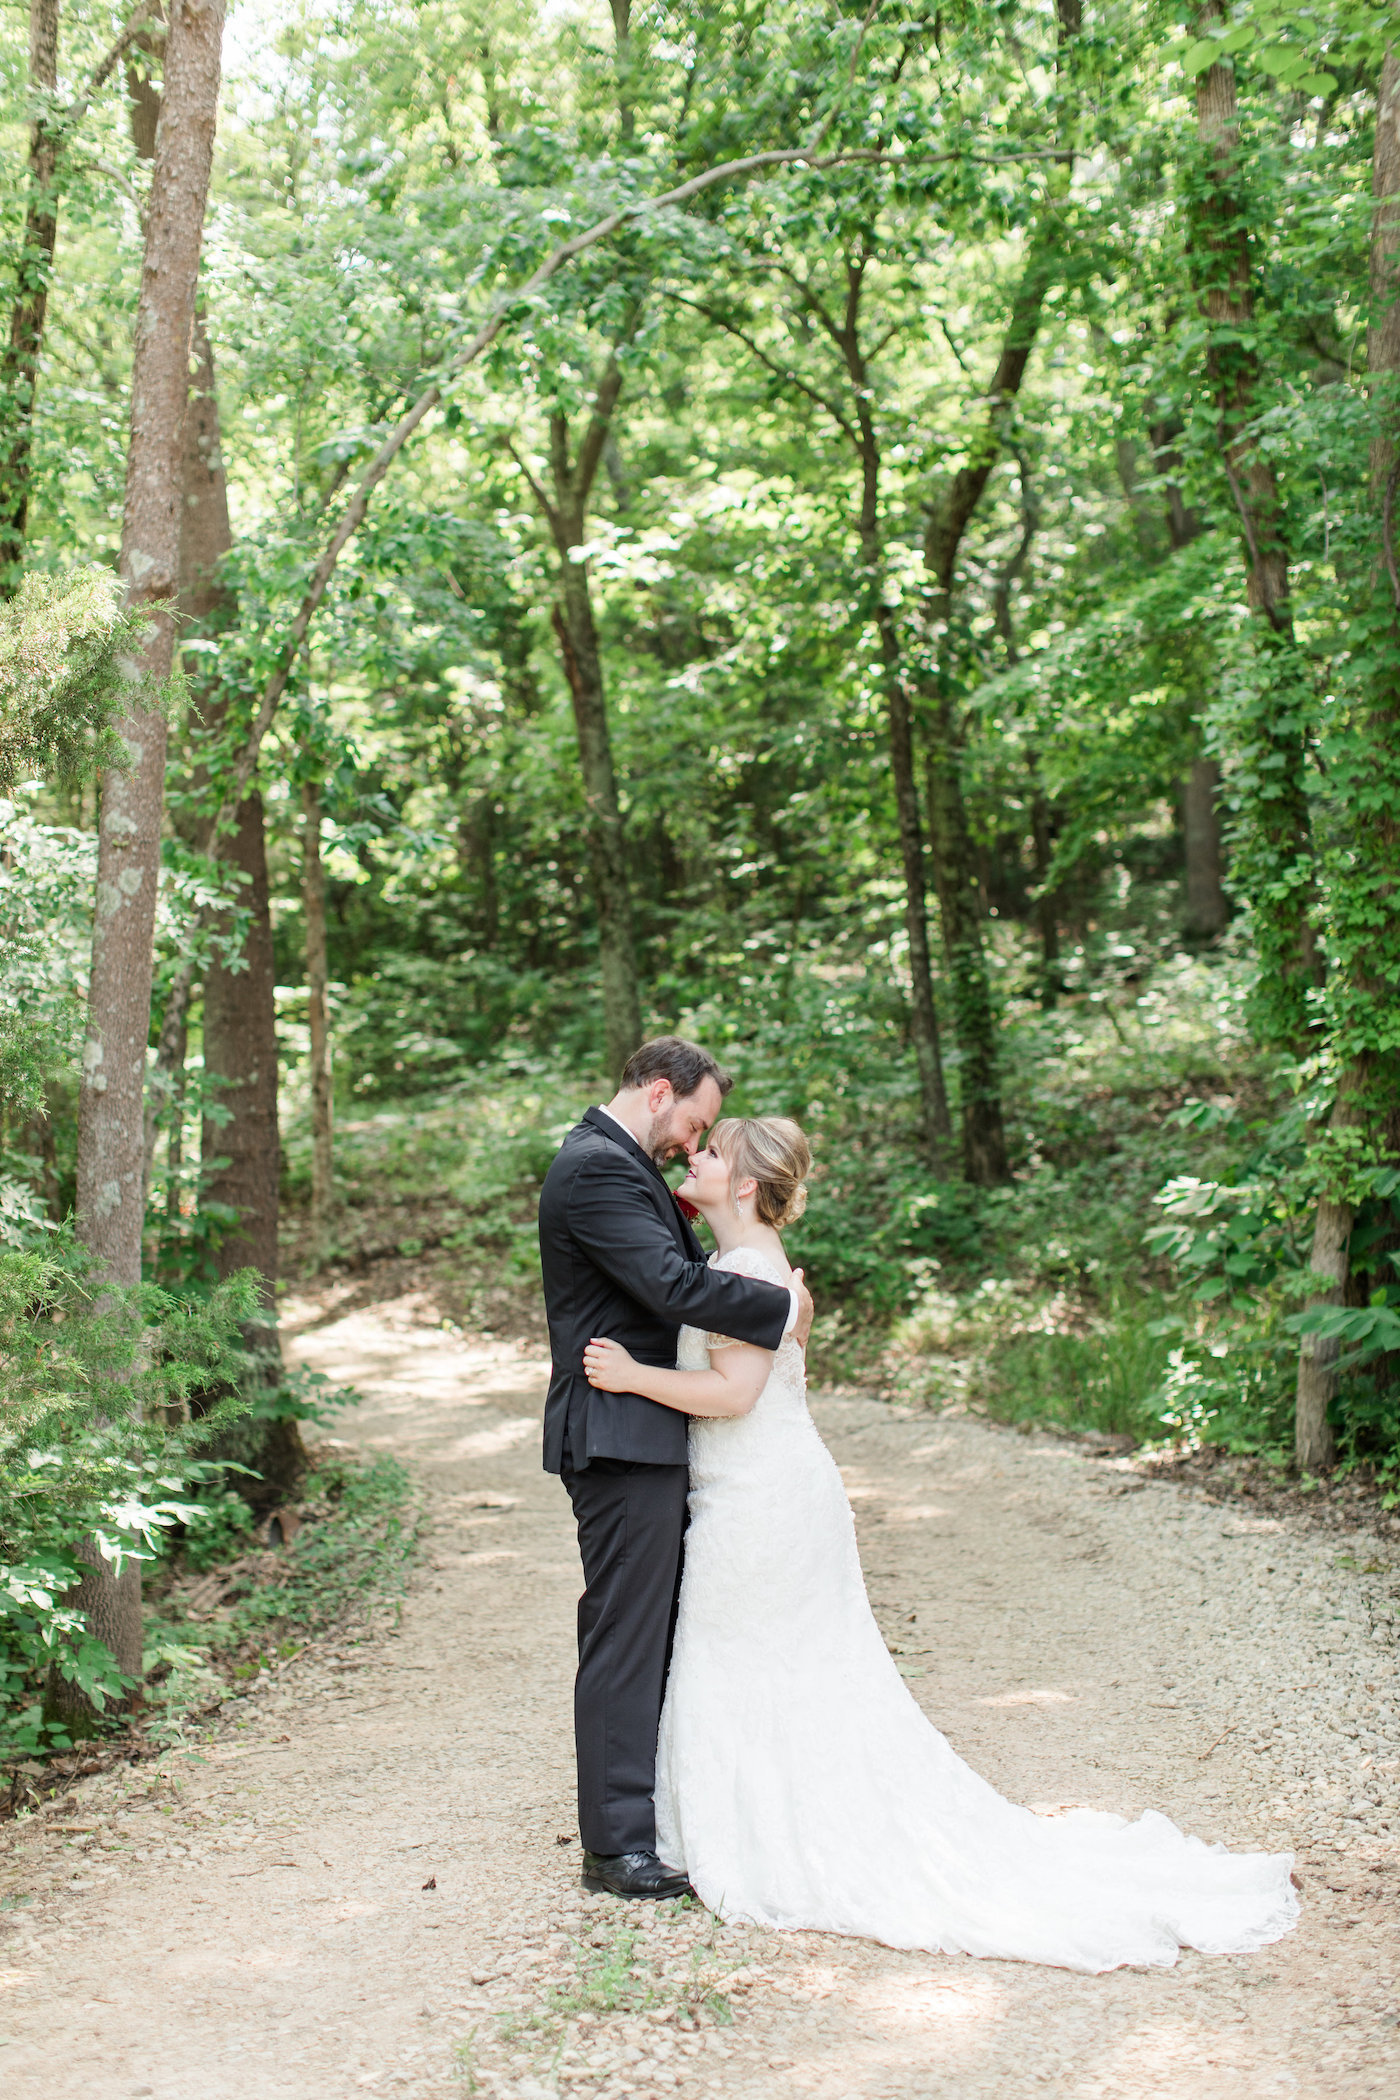 Lindsey & Andrew's Big Day at Our Barn Wedding Venue - Missouri Rustic ...